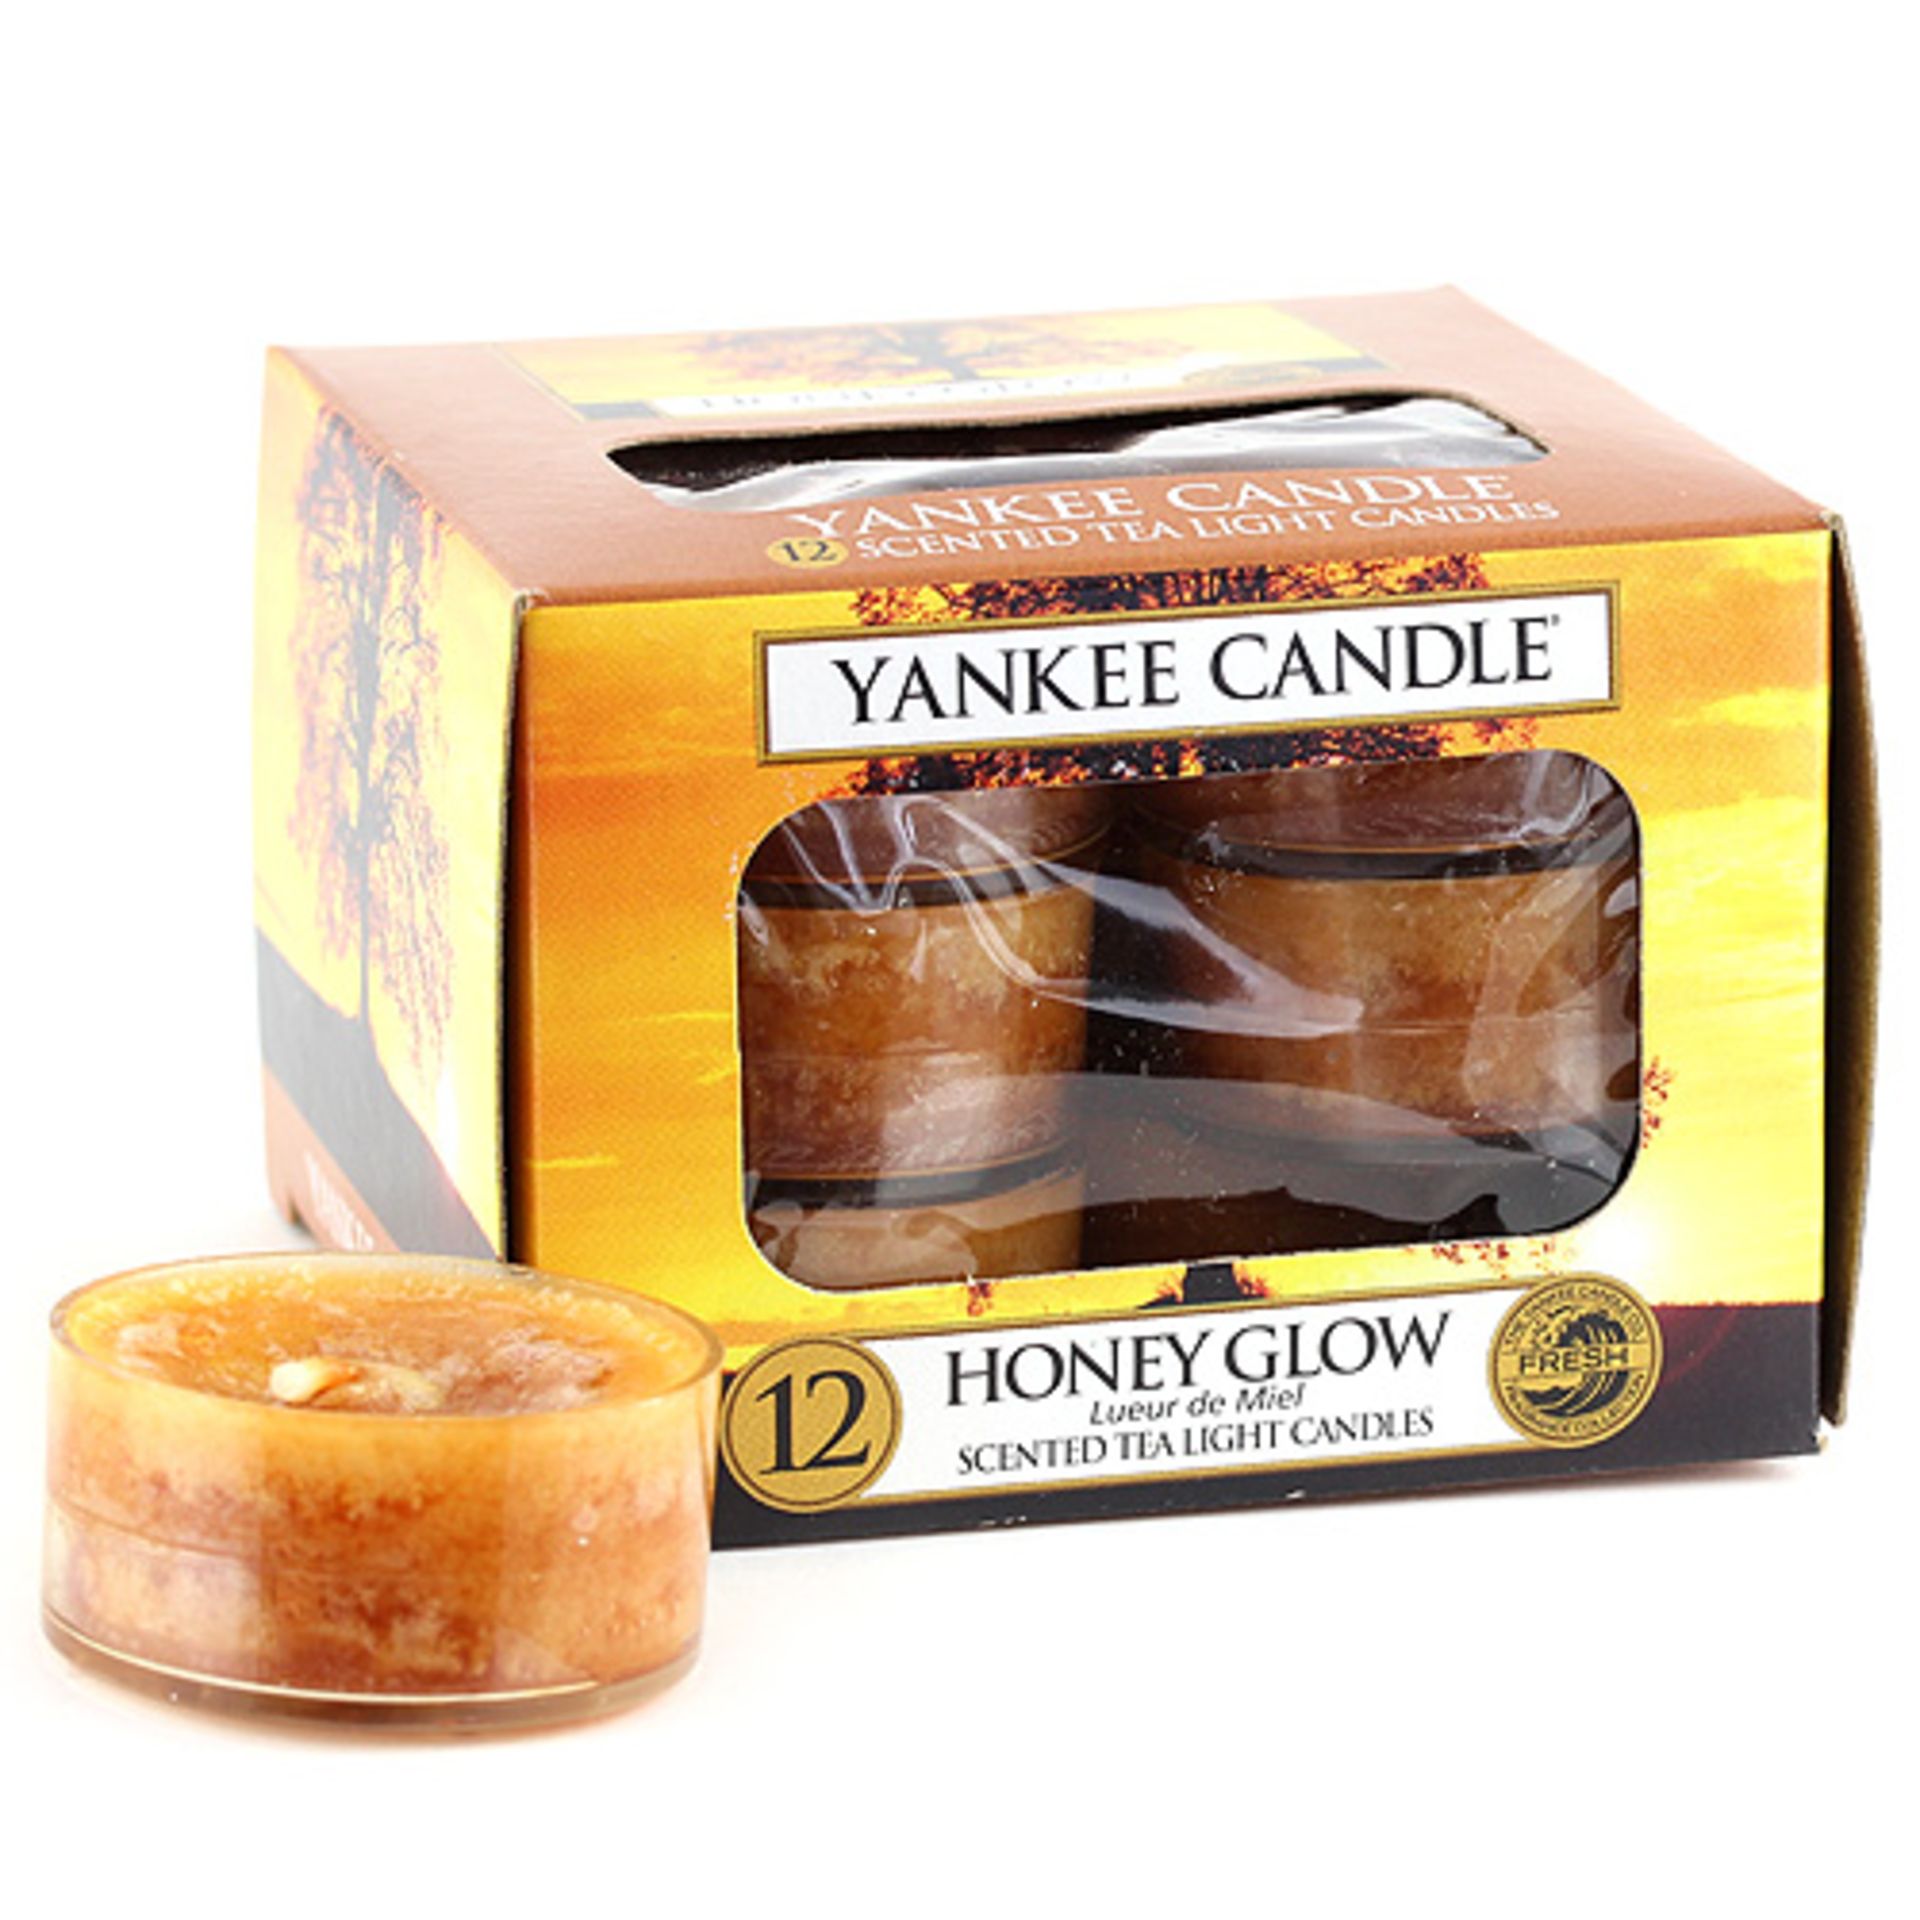 V *TRADE QTY* Brand New 12 Yankee Candle Scented Tea Light Candles Honey Glow eBay Price £8.24 X 4